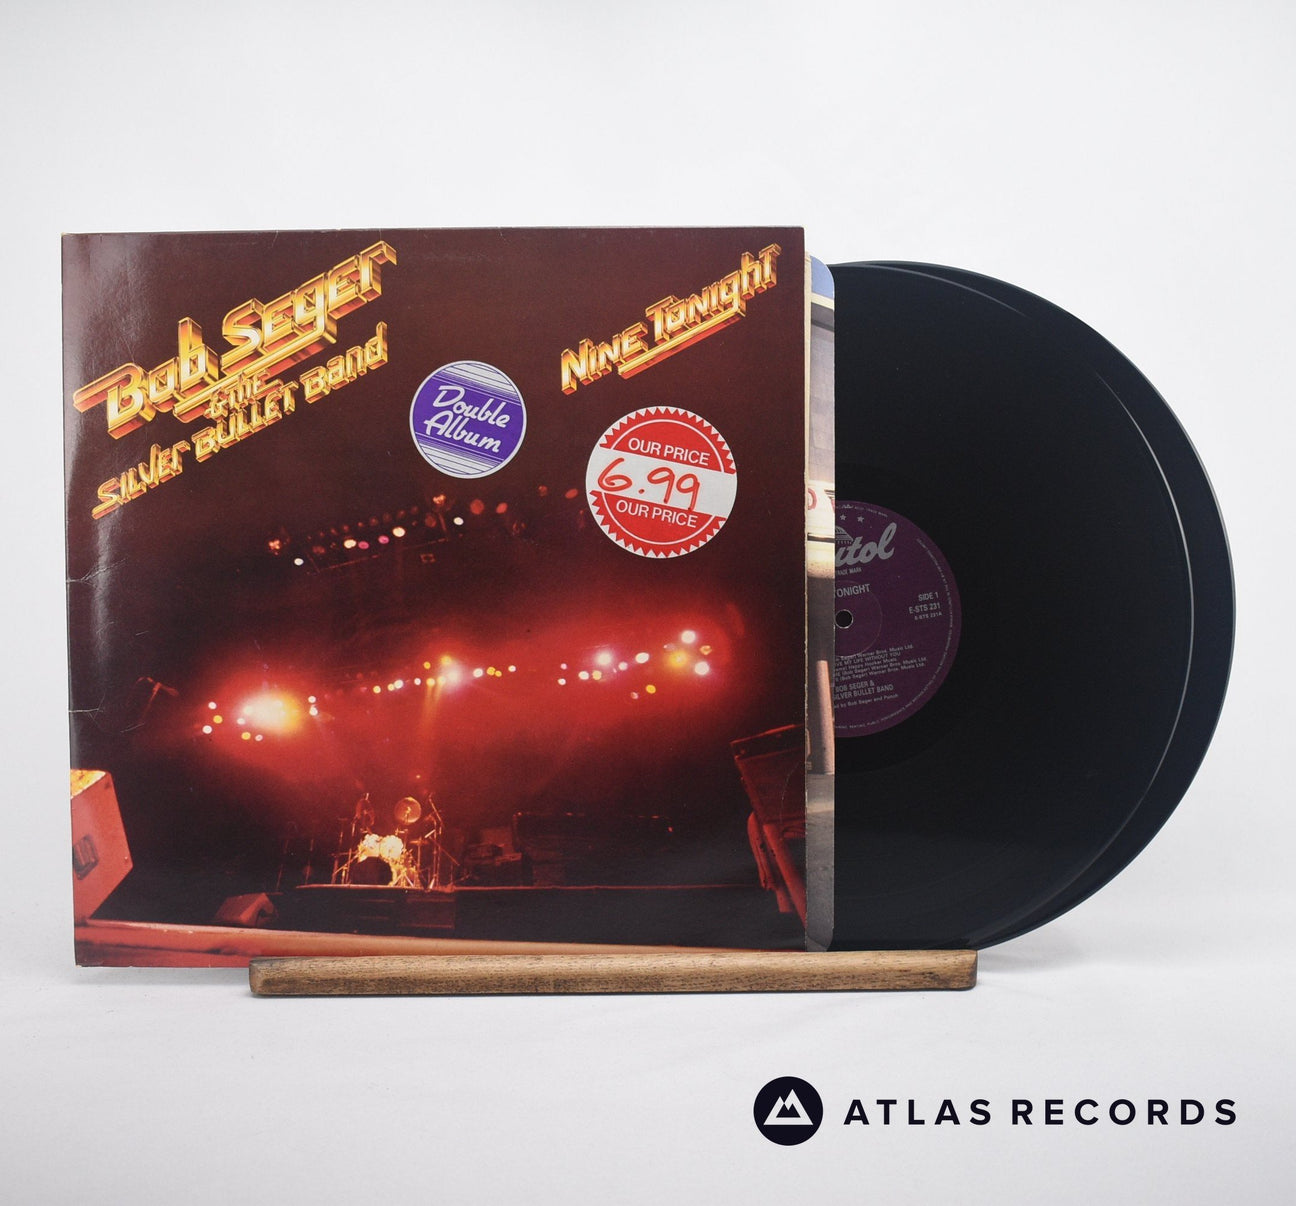 Bob Seger And The Silver Bullet Band Nine Tonight Double LP Vinyl Record - Front Cover & Record